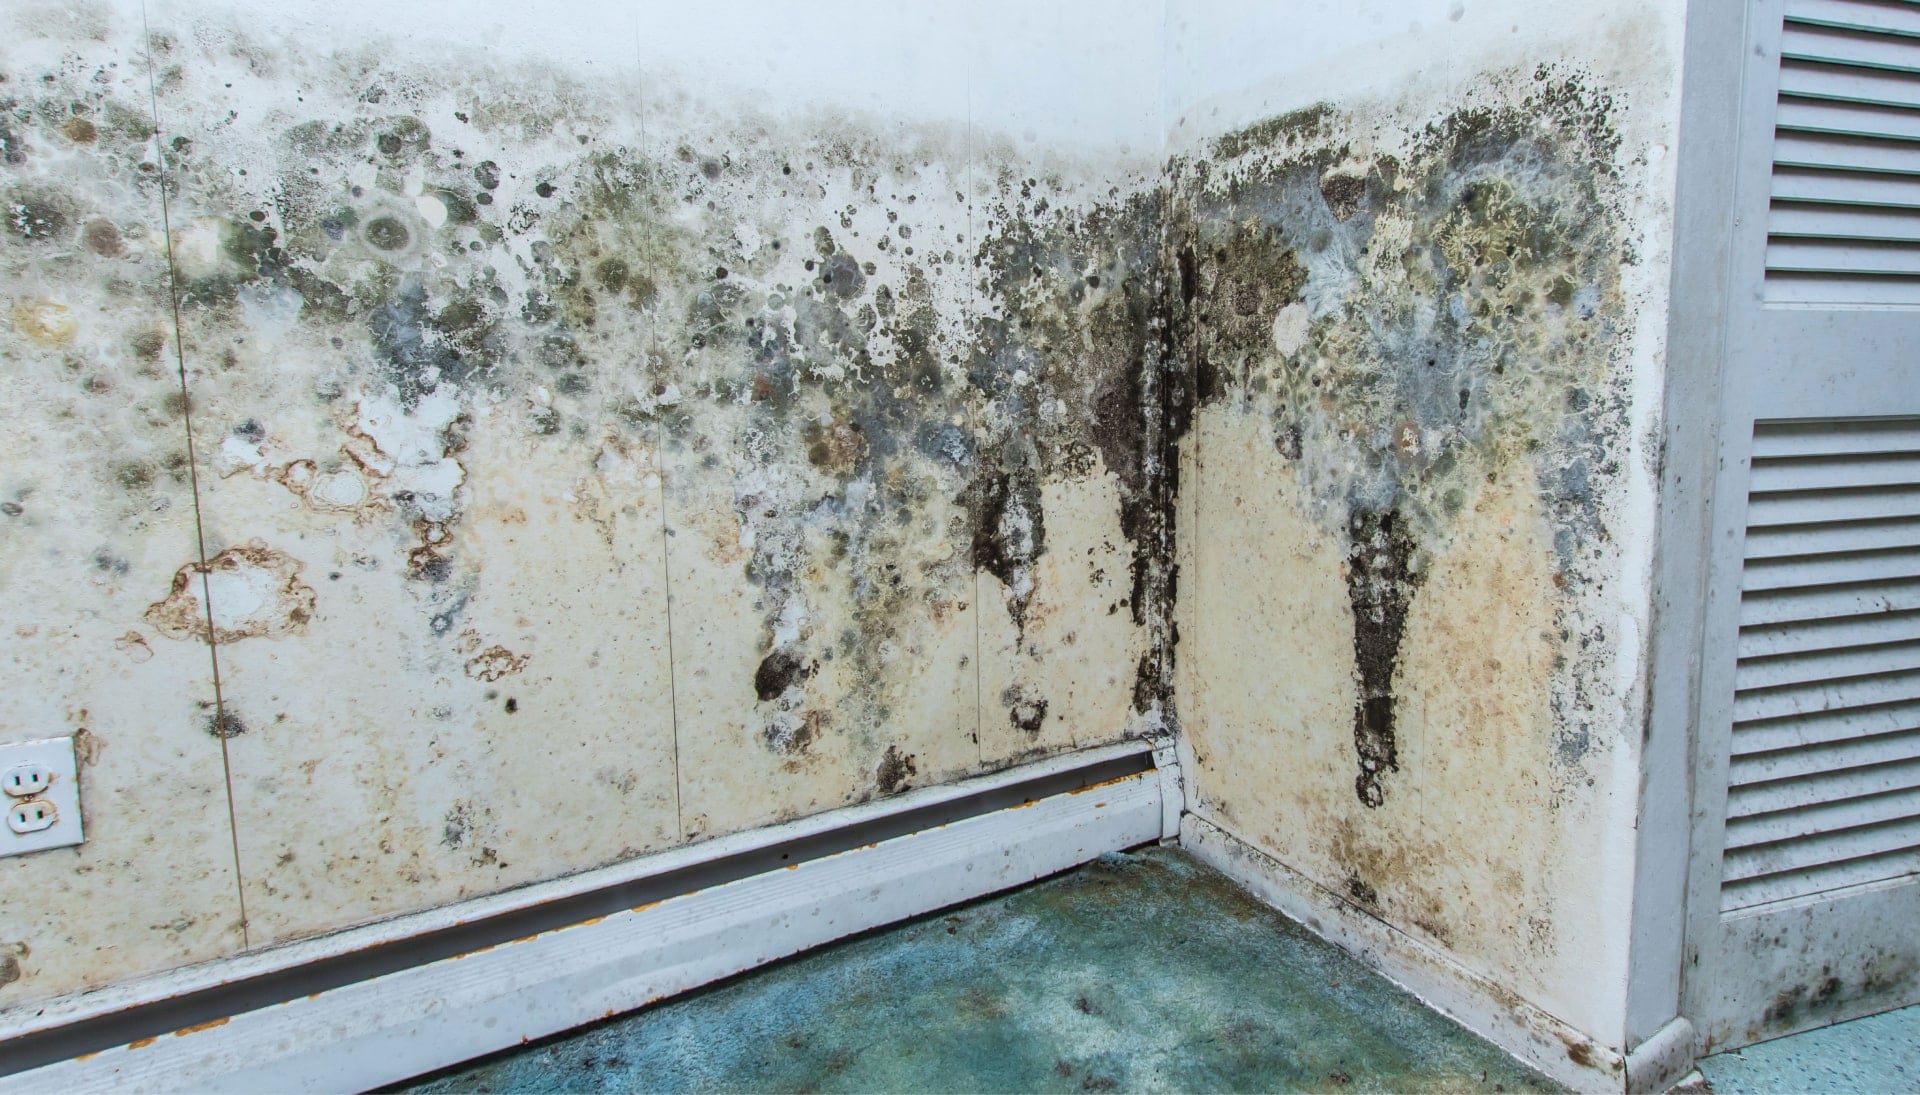 A mold remediation team using specialized techniques to remove mold damage and control odors in a Sarasota property, with a focus on safety and efficiency